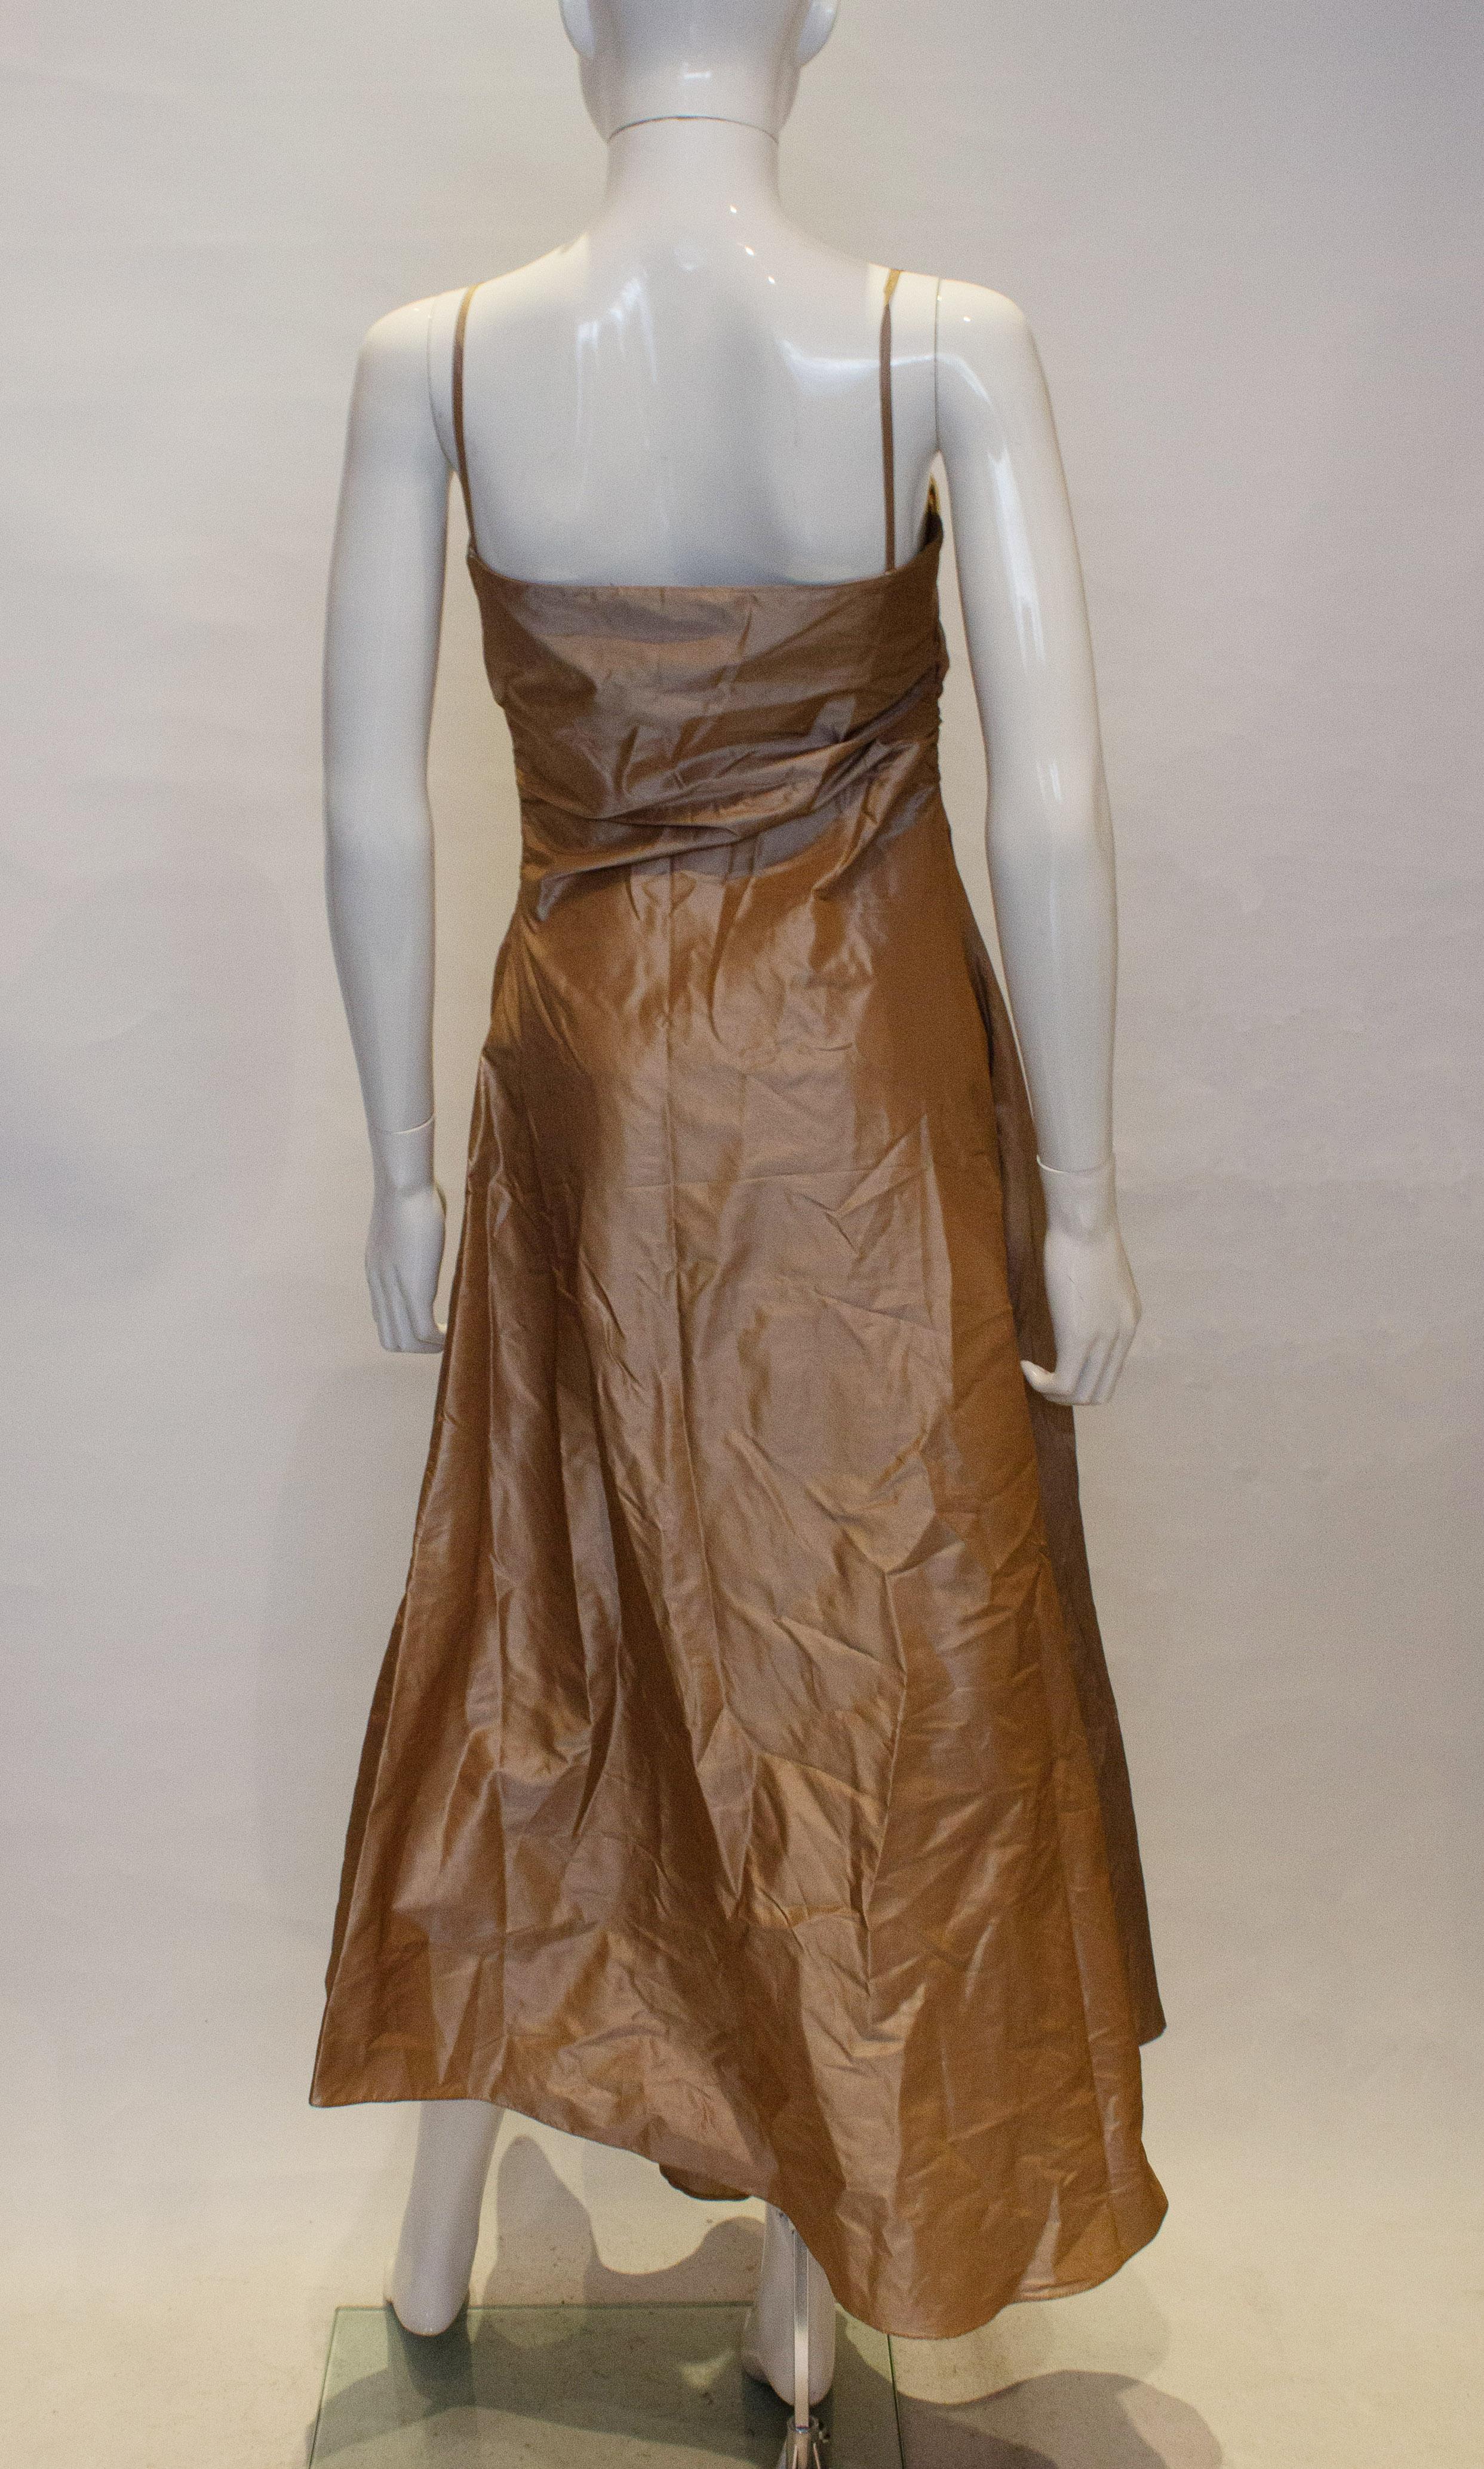 A fun  silk party dress by Max Mara. The dress is a silk tafetta fabric in a soft gold colour.
It has a side zip opening, gatering on both sides with frill and flower detail on the front.  It is unlined and has two spagetti straps.